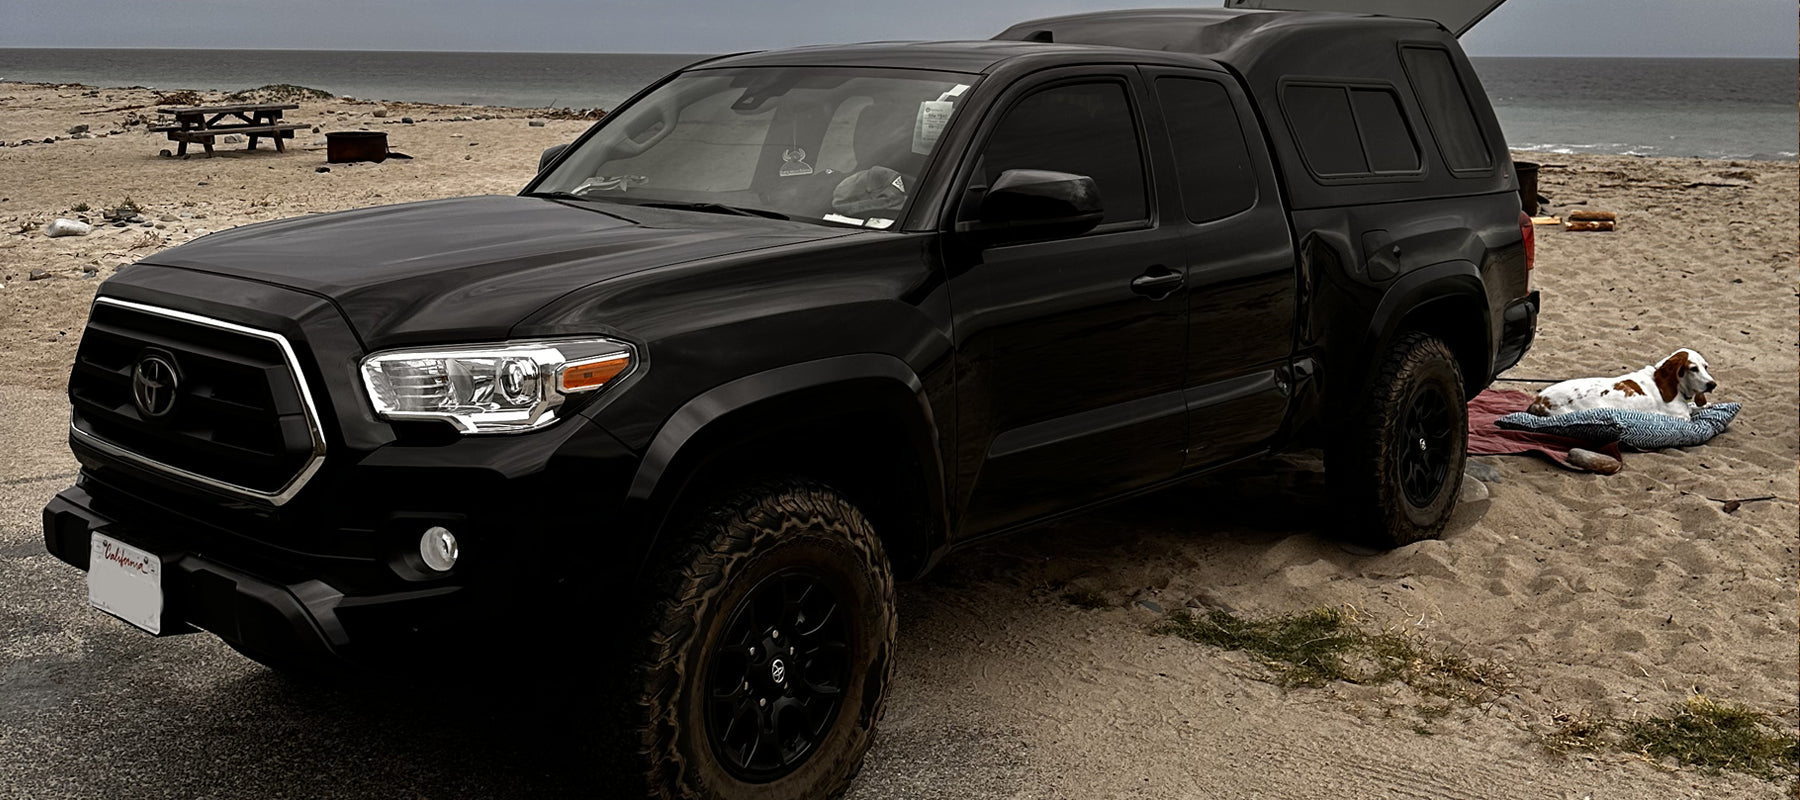 Rigs We Dig: Jeremy Leabres' Tacoma Build